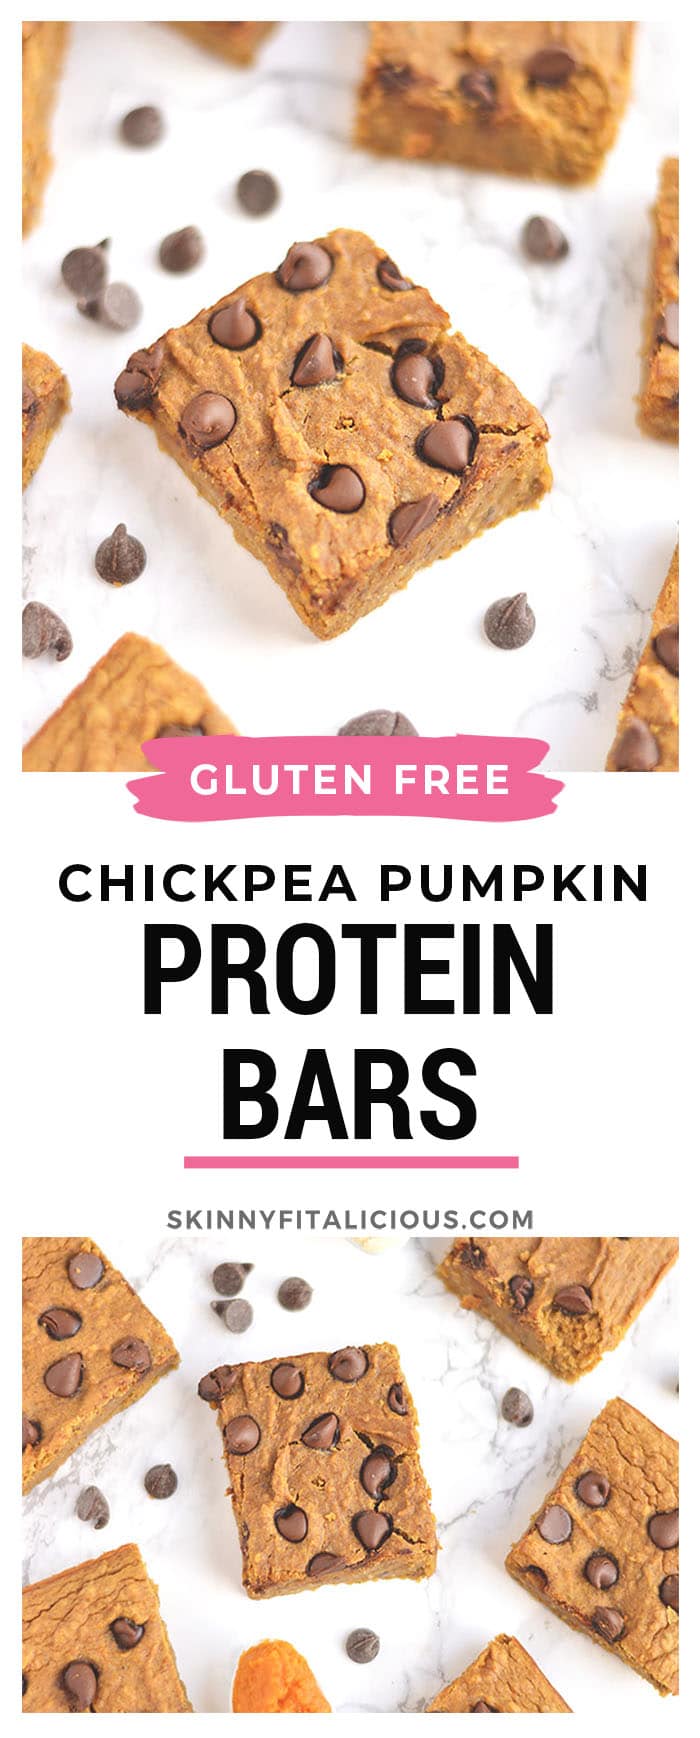 Chickpea Pumpkin Chocolate Protein Bars packed with protein & taste like pumpkin pie! Made with garbanzo beans, these ultra creamy bars are an easy blend & bake snack anyone will love. Gluten Free + Low Calorie 